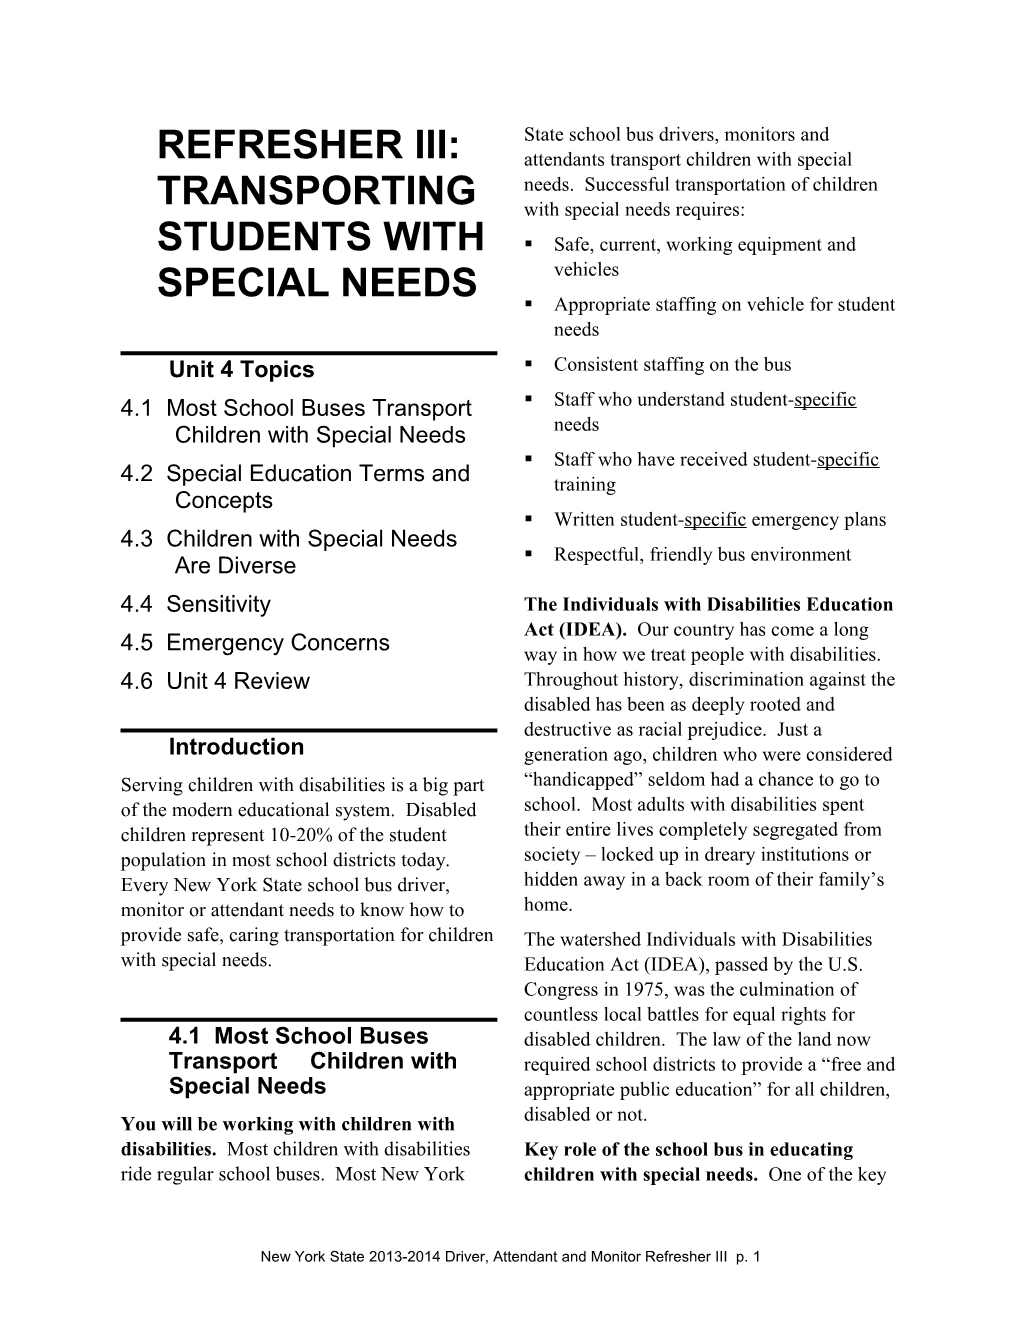 Refresher Iii: Transporting Students with Special Needs